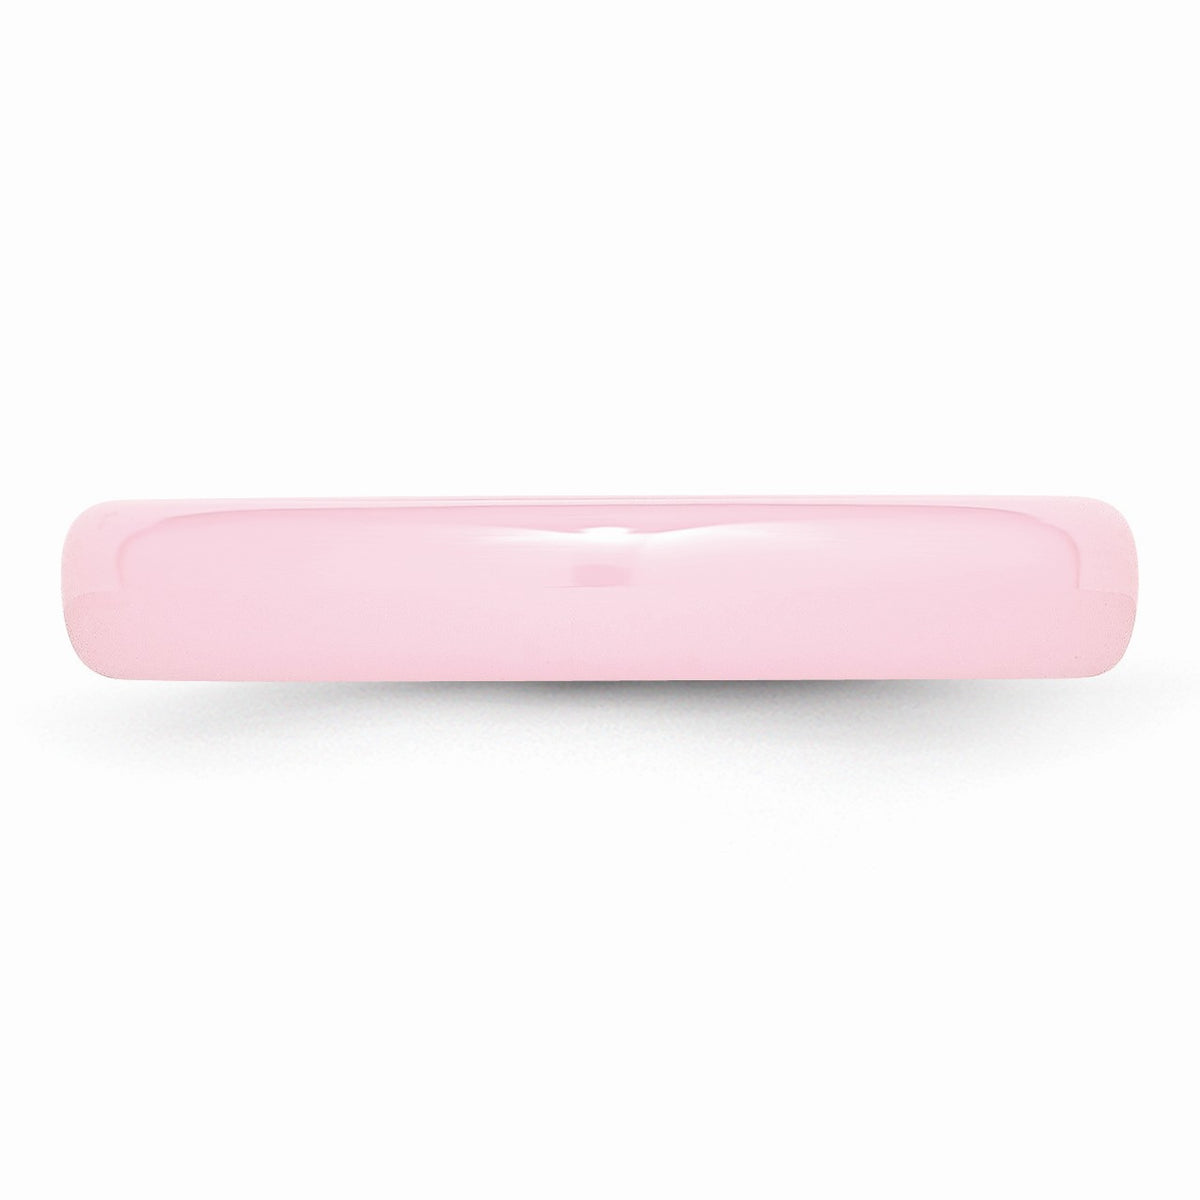 Alternate view of the Pink Ceramic, 4mm Domed Comfort Fit Band by The Black Bow Jewelry Co.